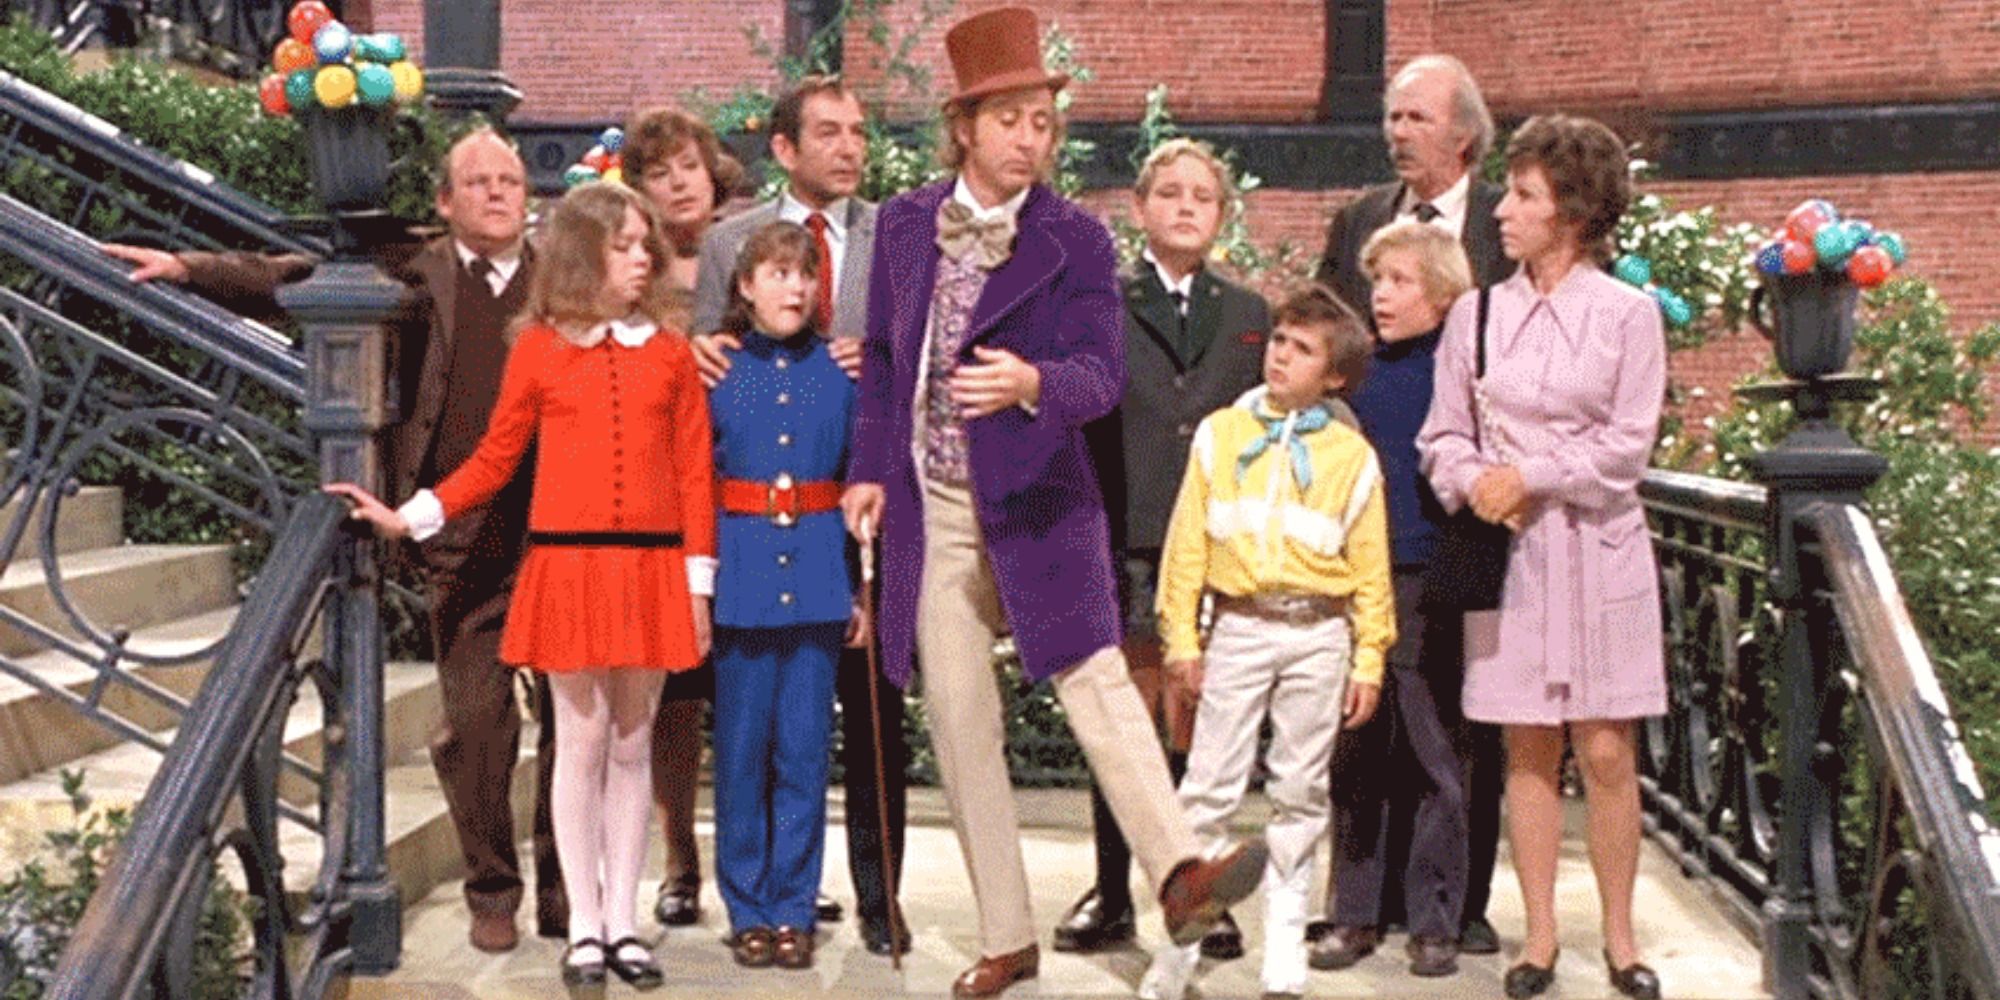 Gene Wilder's Willy Wonka leading his guests during the "Pure Imagination" number in Willy Wonka and the Chocolate Factory